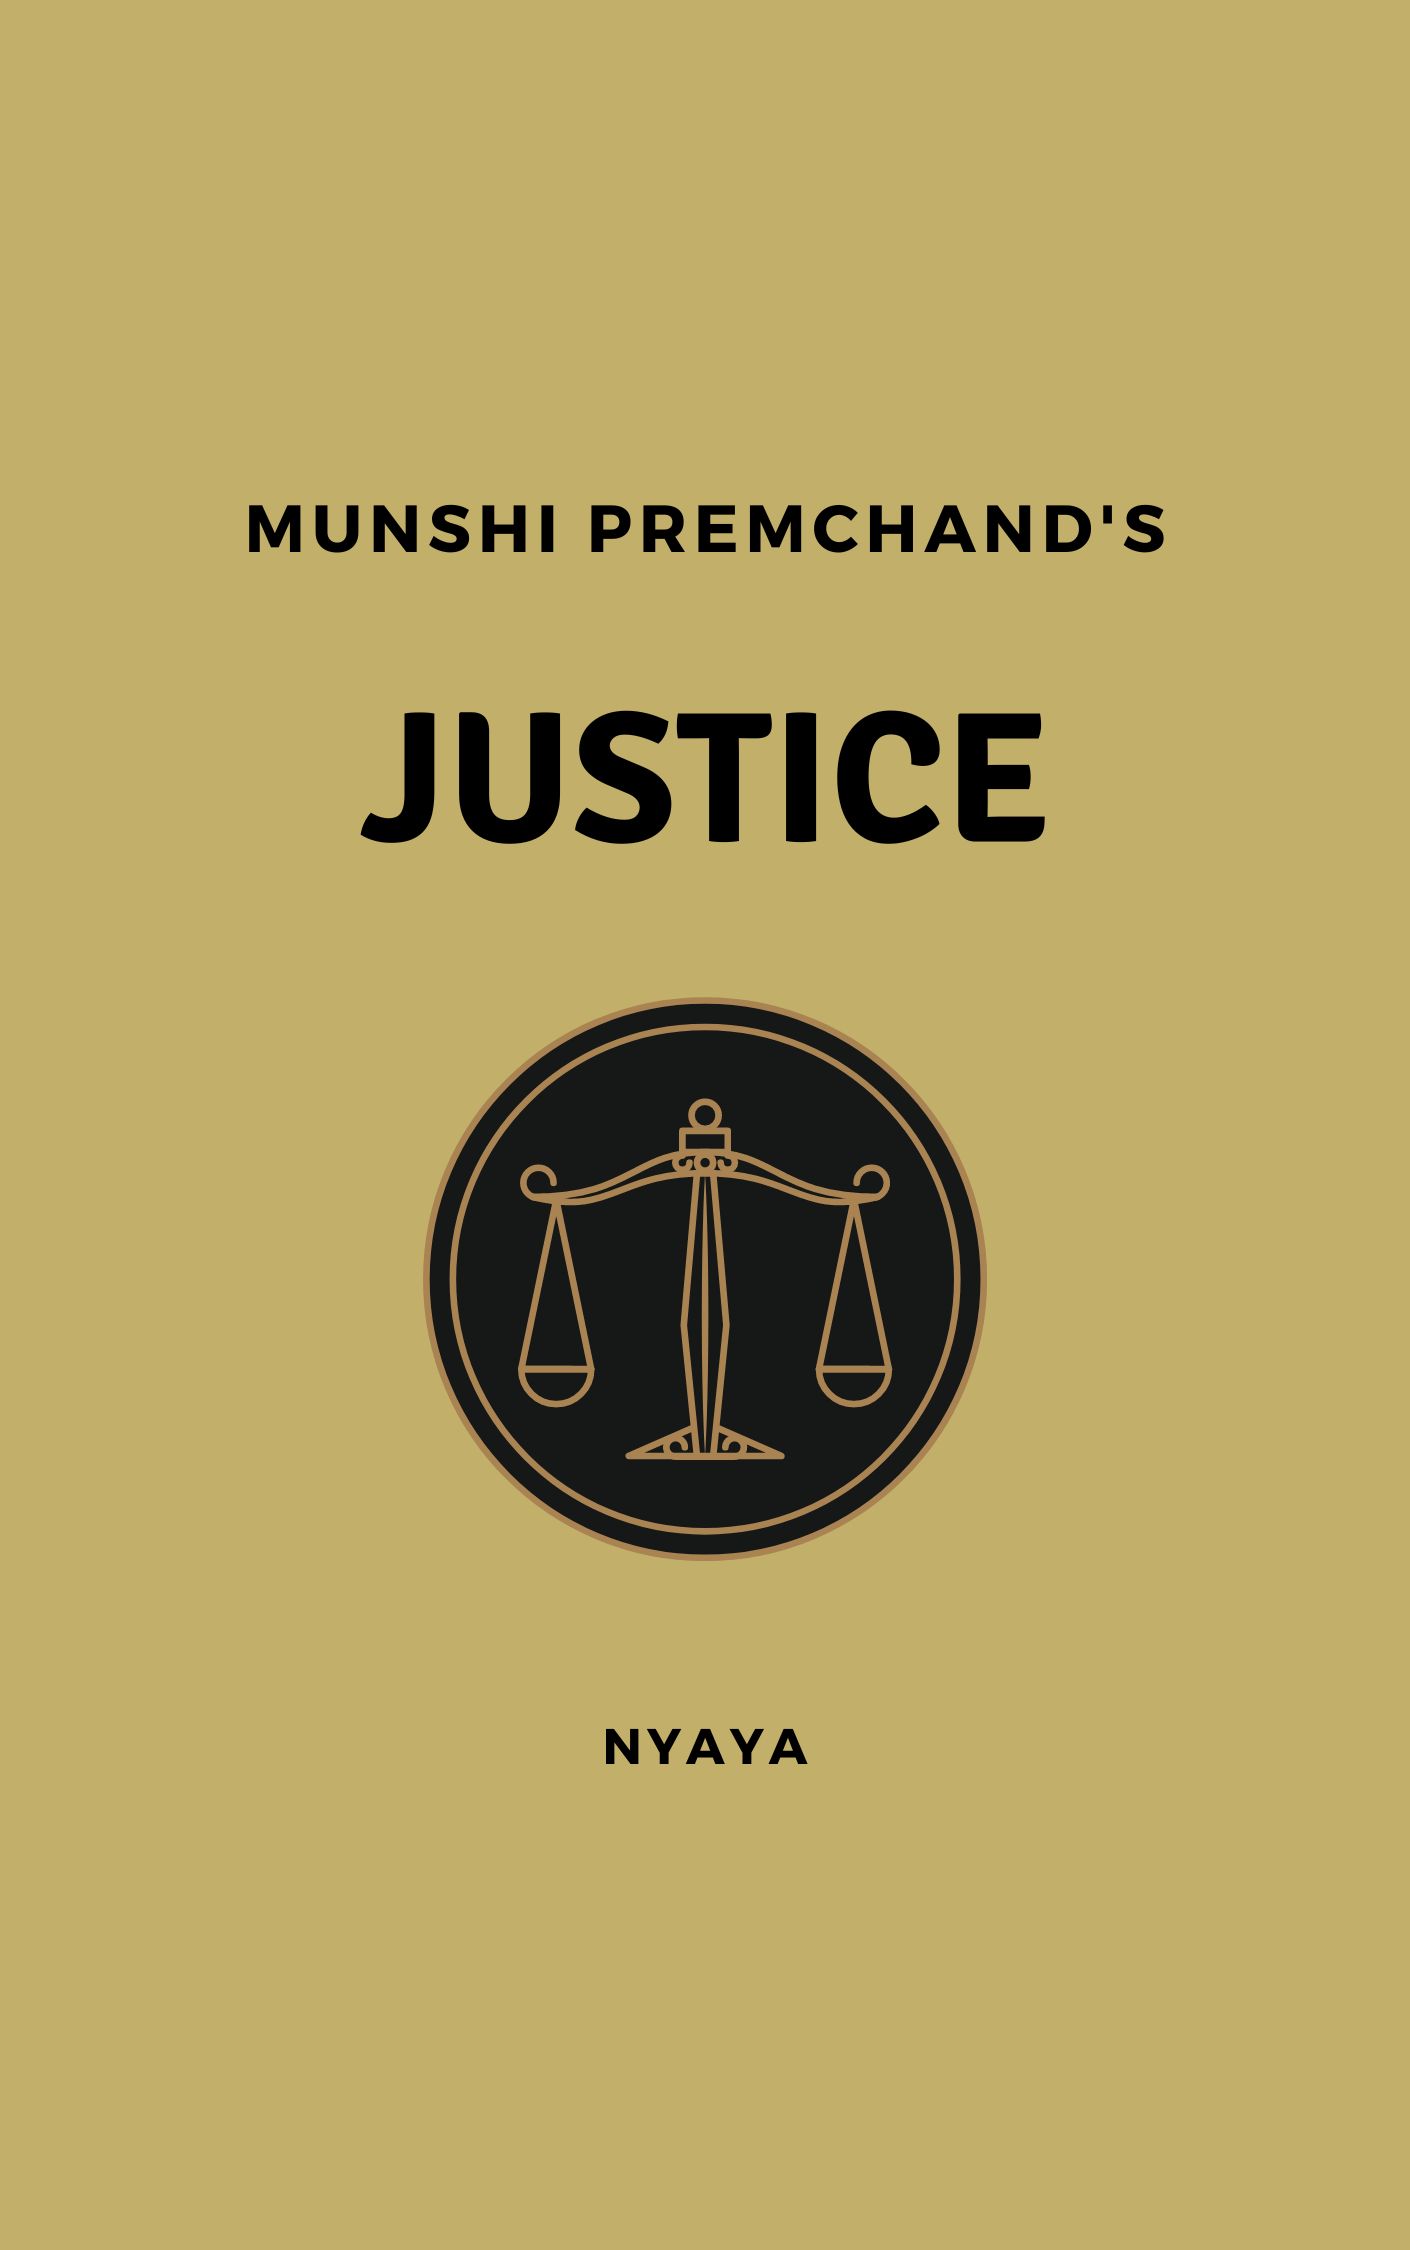 Justice by Munshi Premchand